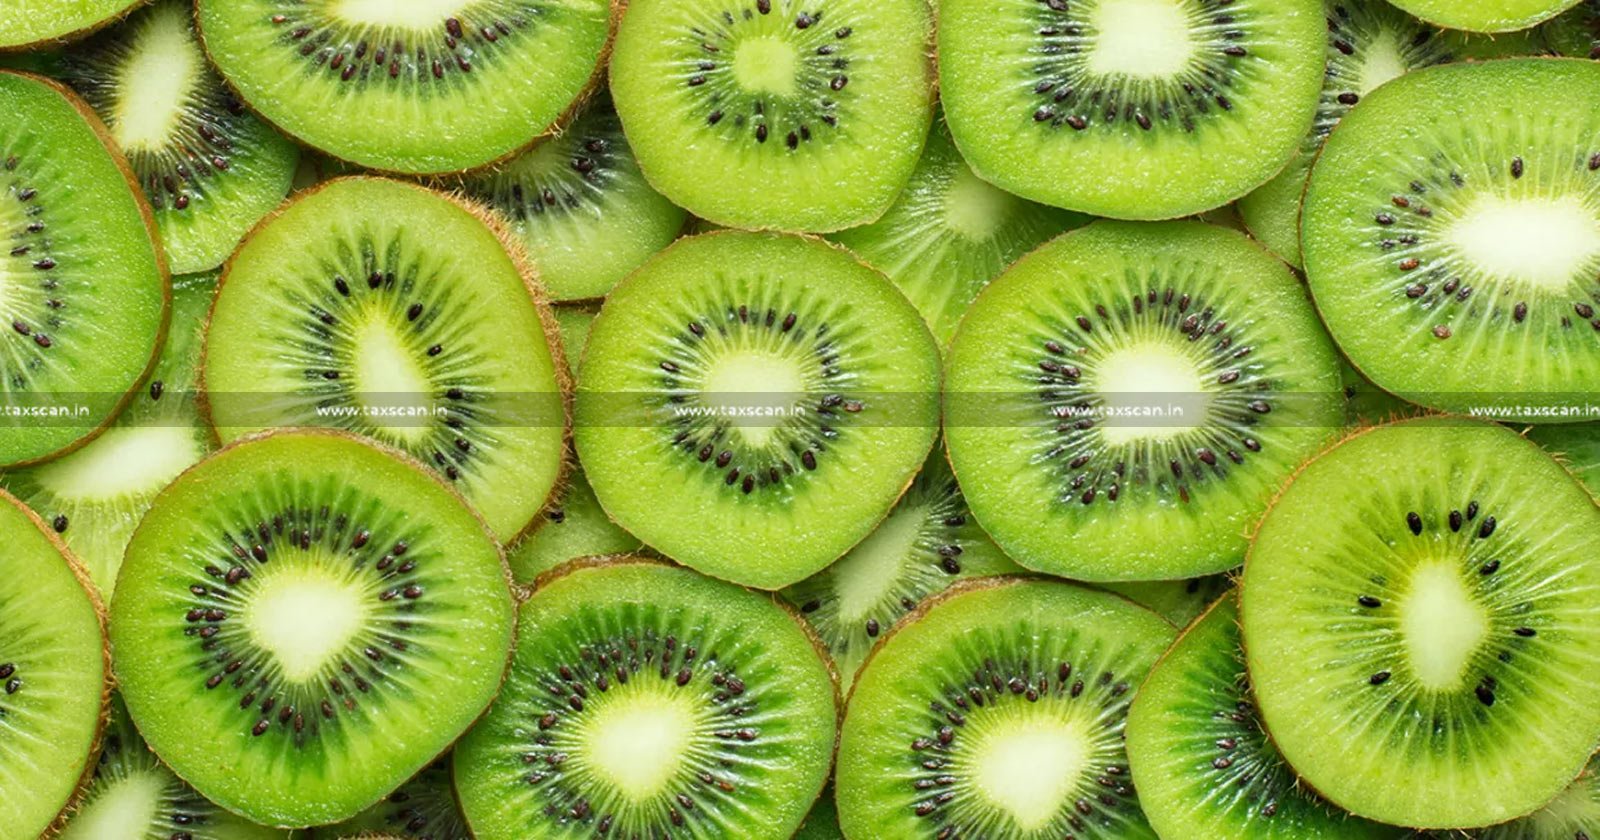 Authorities - Greater Swiftness - Act - Goods - Perishable in Nature - Gujarat High Court - Provisional Release - Provisional Release of Kiwi Fruits - Kiwi Fruits - Taxscan